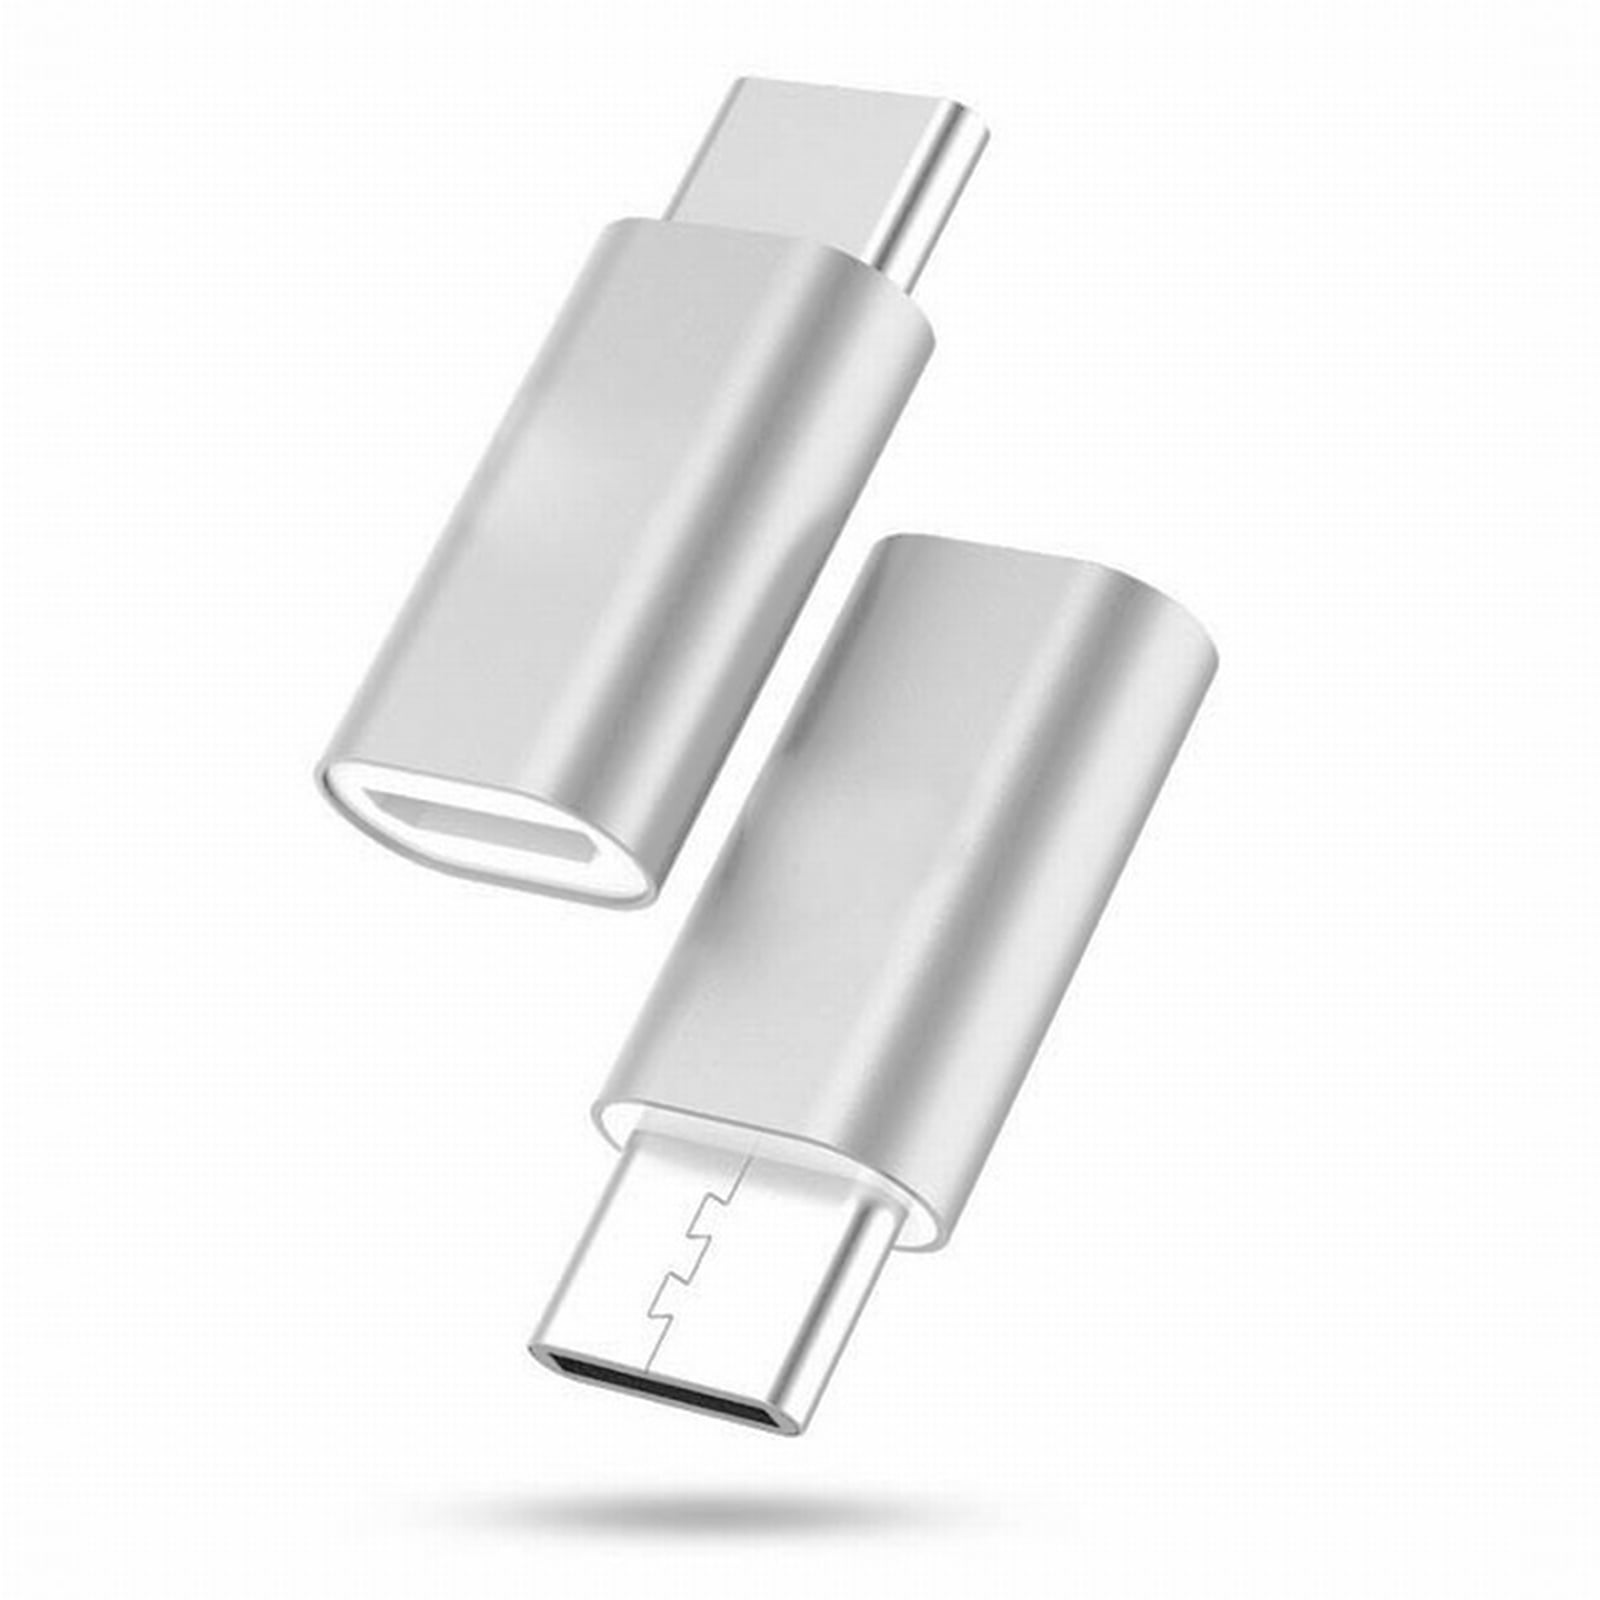 micro usb to usb c converter for oneplus 7pro